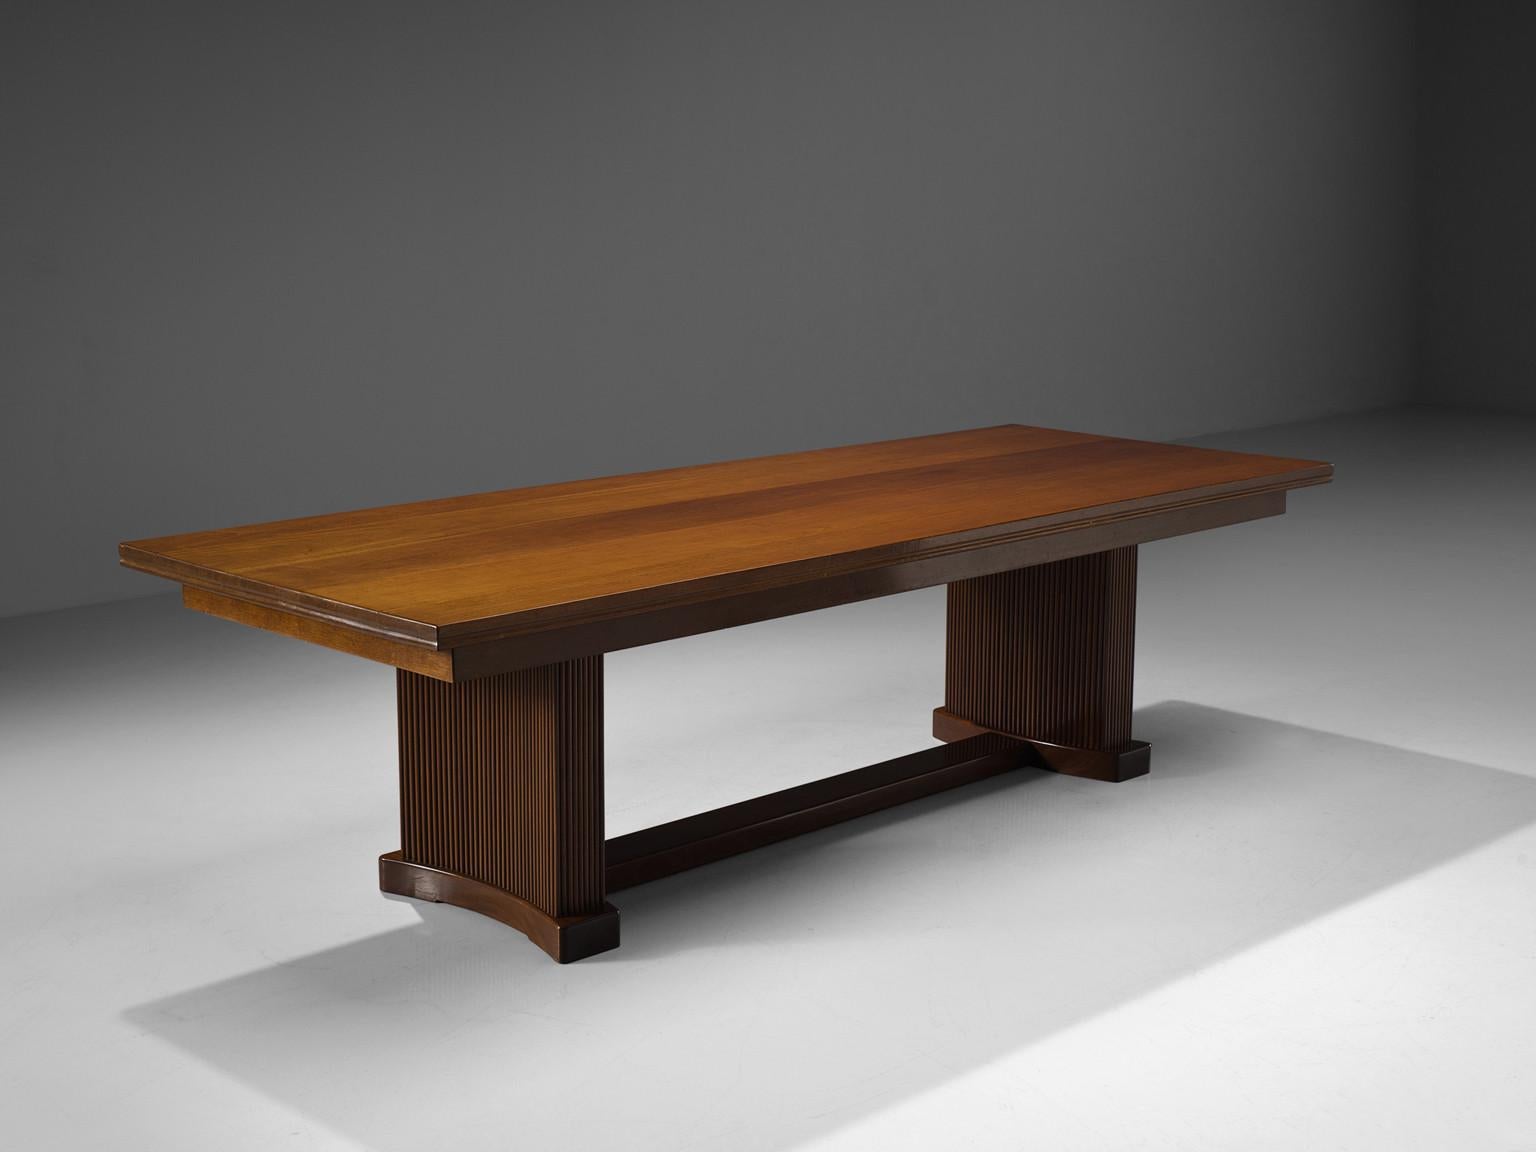 Conference table, mahogany, Denmark, 1940s

Gorgeous conference table in dark mahogany. The table has a monumental feel due to the beautifully crafted base that consists out of small mahogany ribs. This sculptural feeling is emphasized by the warm